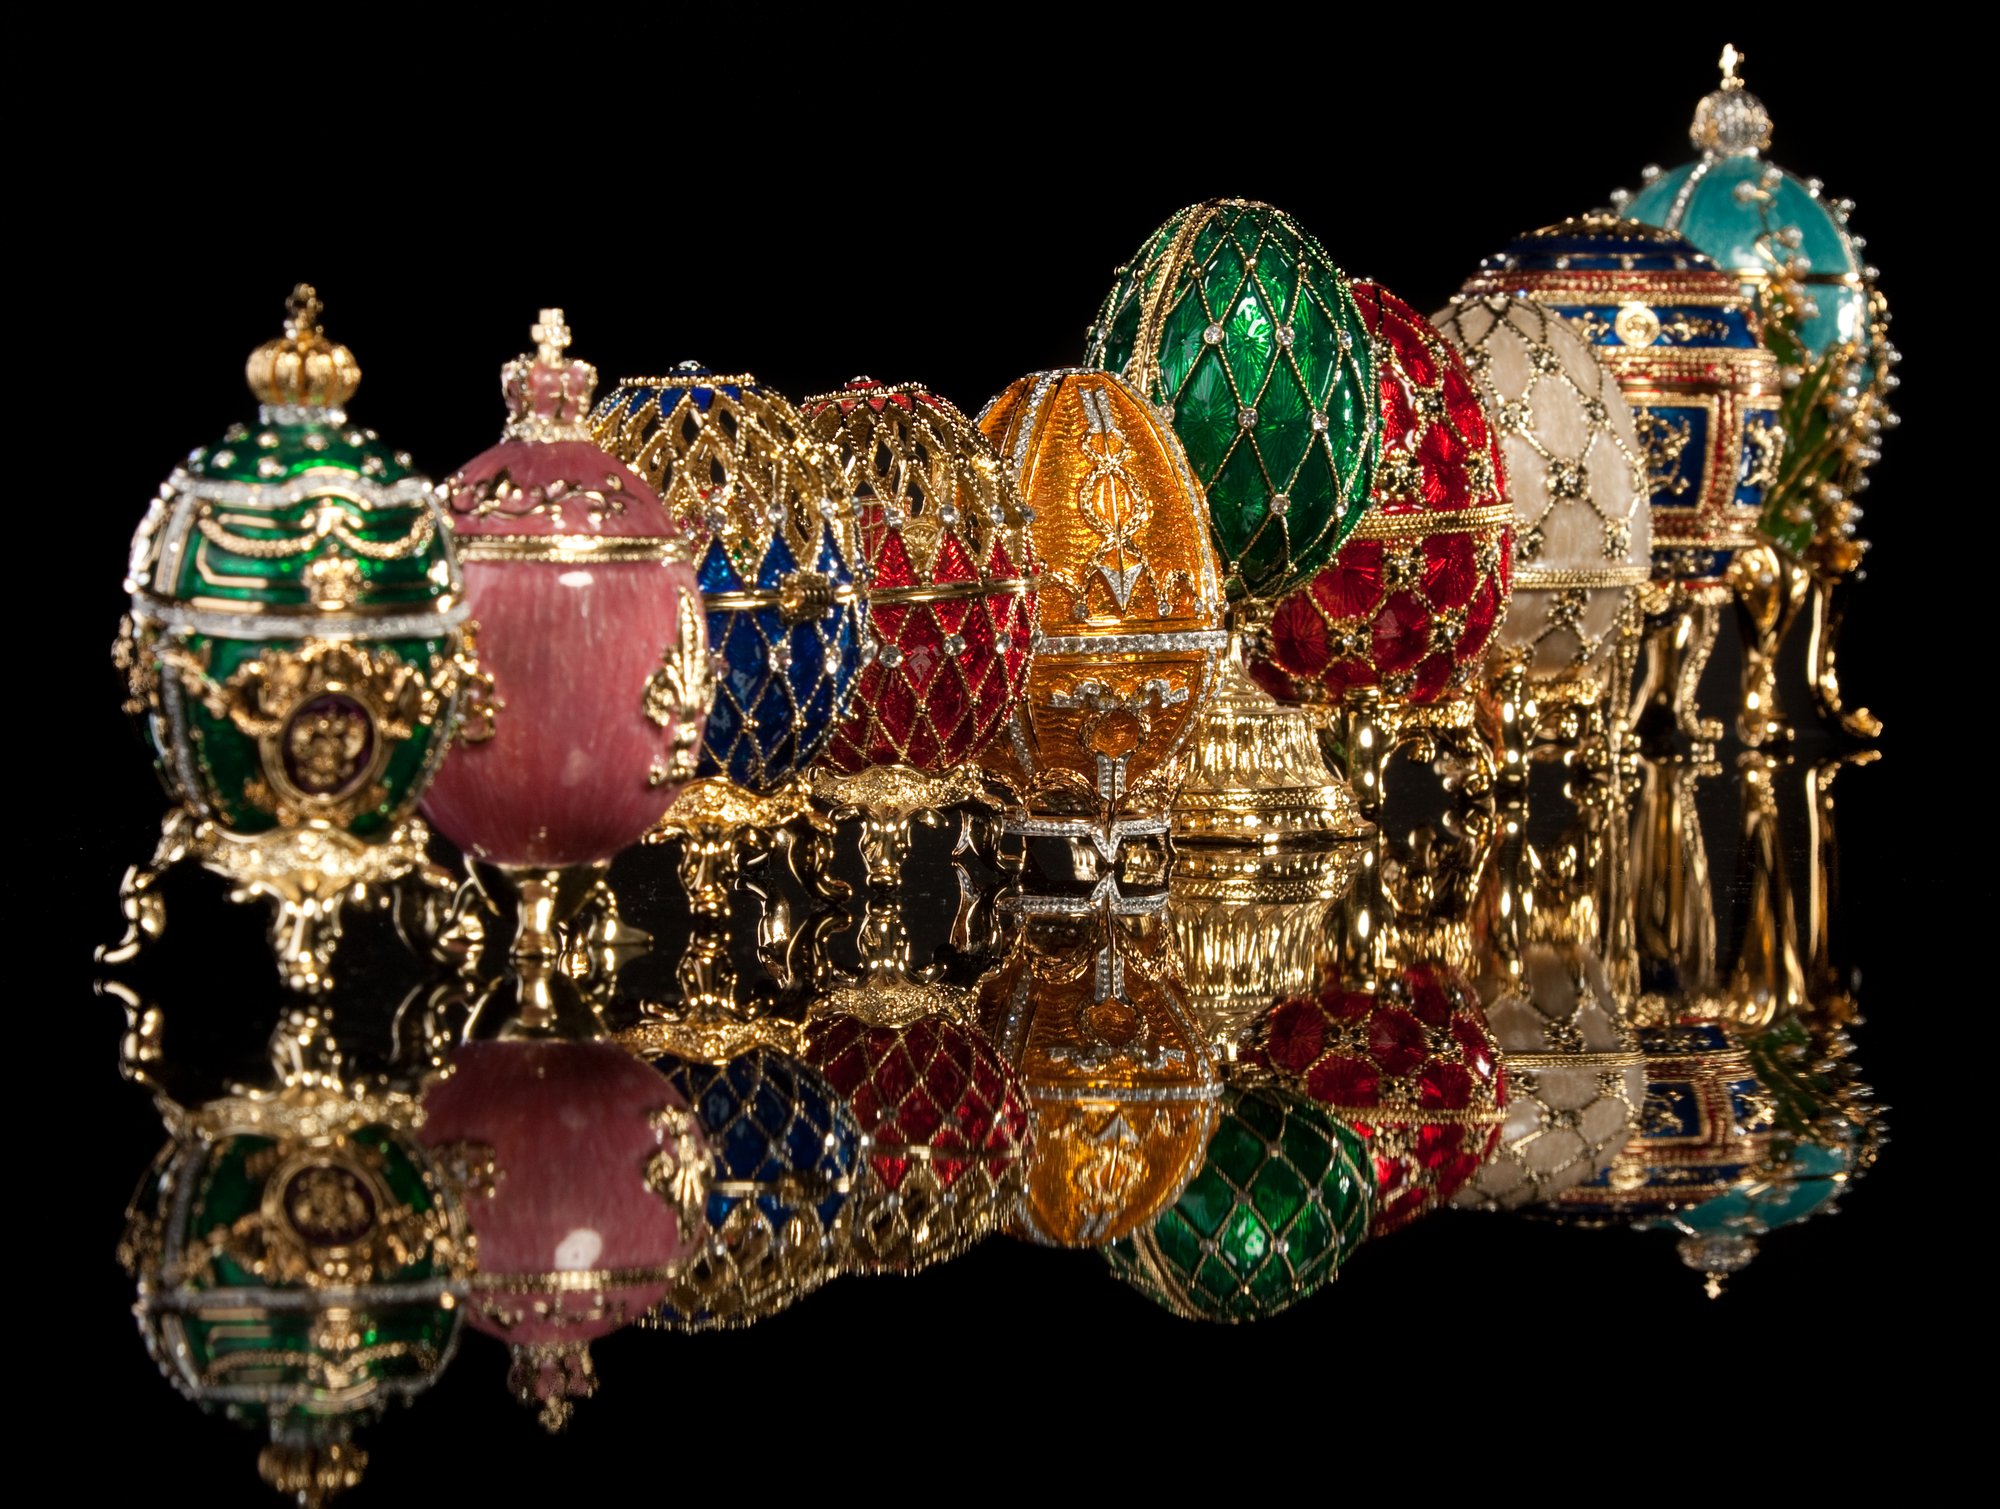 Group Faberge eggs. Isolated on black.